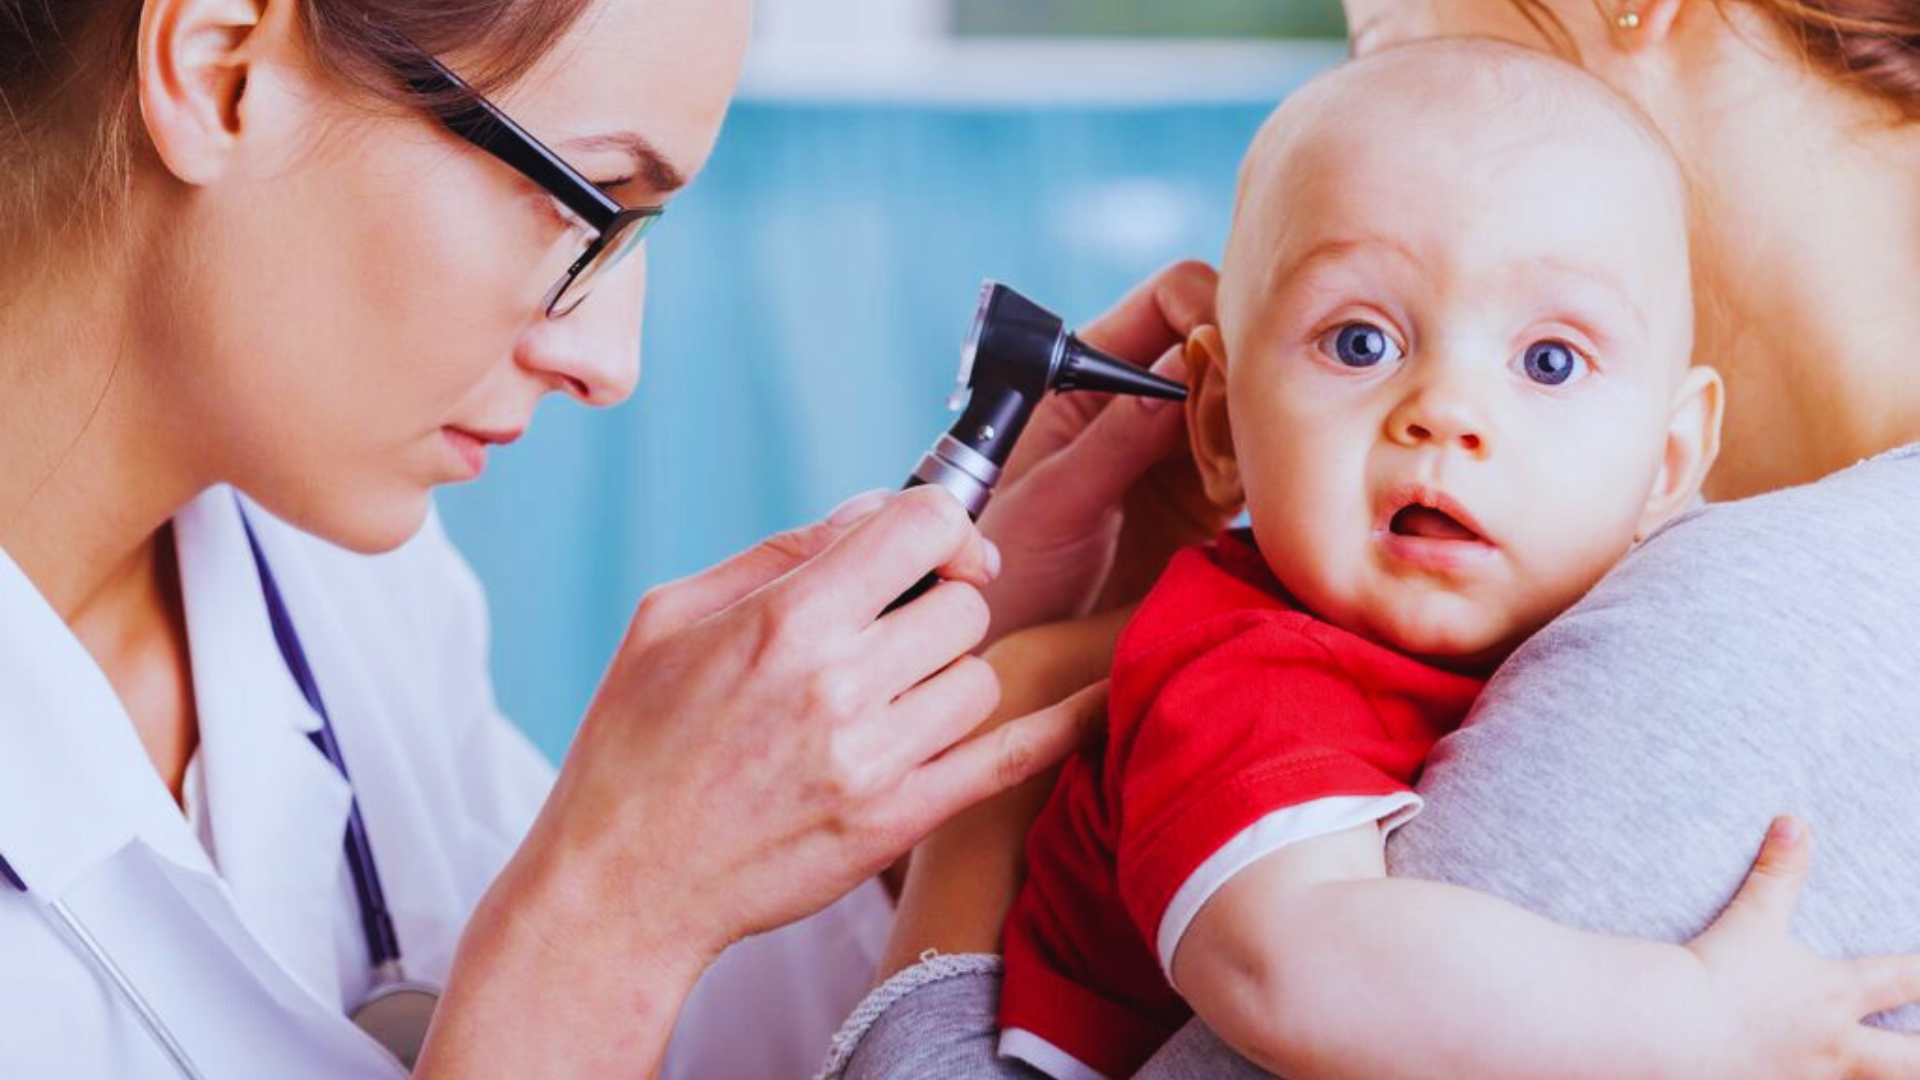 Things You Need To Know About Congenital Hearing Loss